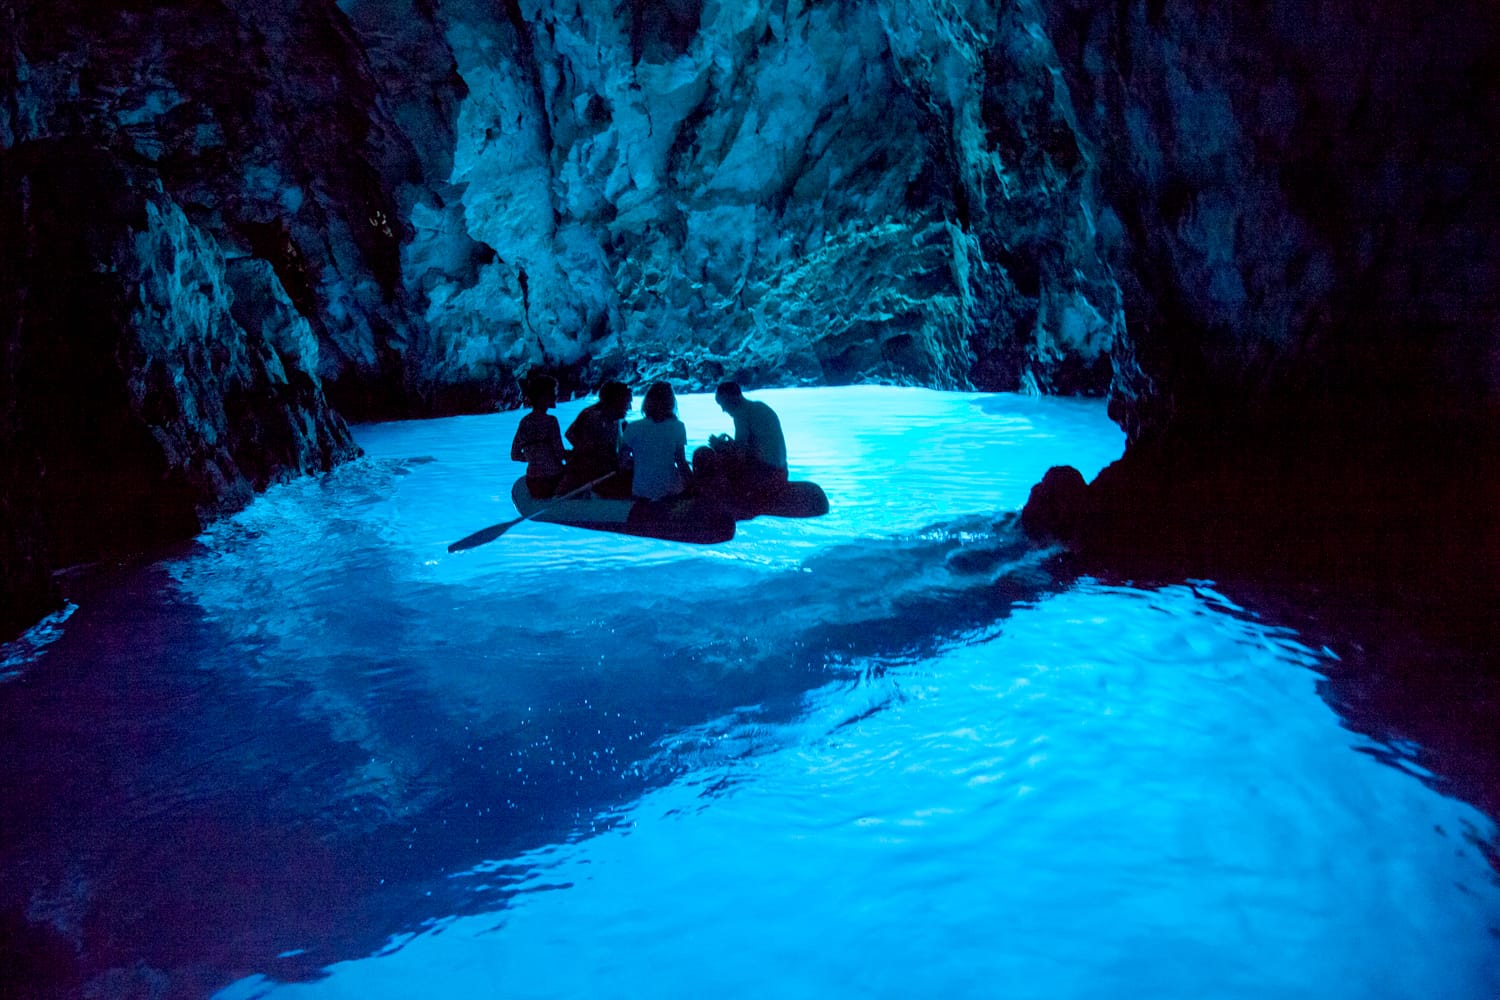 The Blue Cave is one of Croatia's natural wonders, located on the eastern side of island Bisevo. The cave receives more than 90,000 tourist visits every year